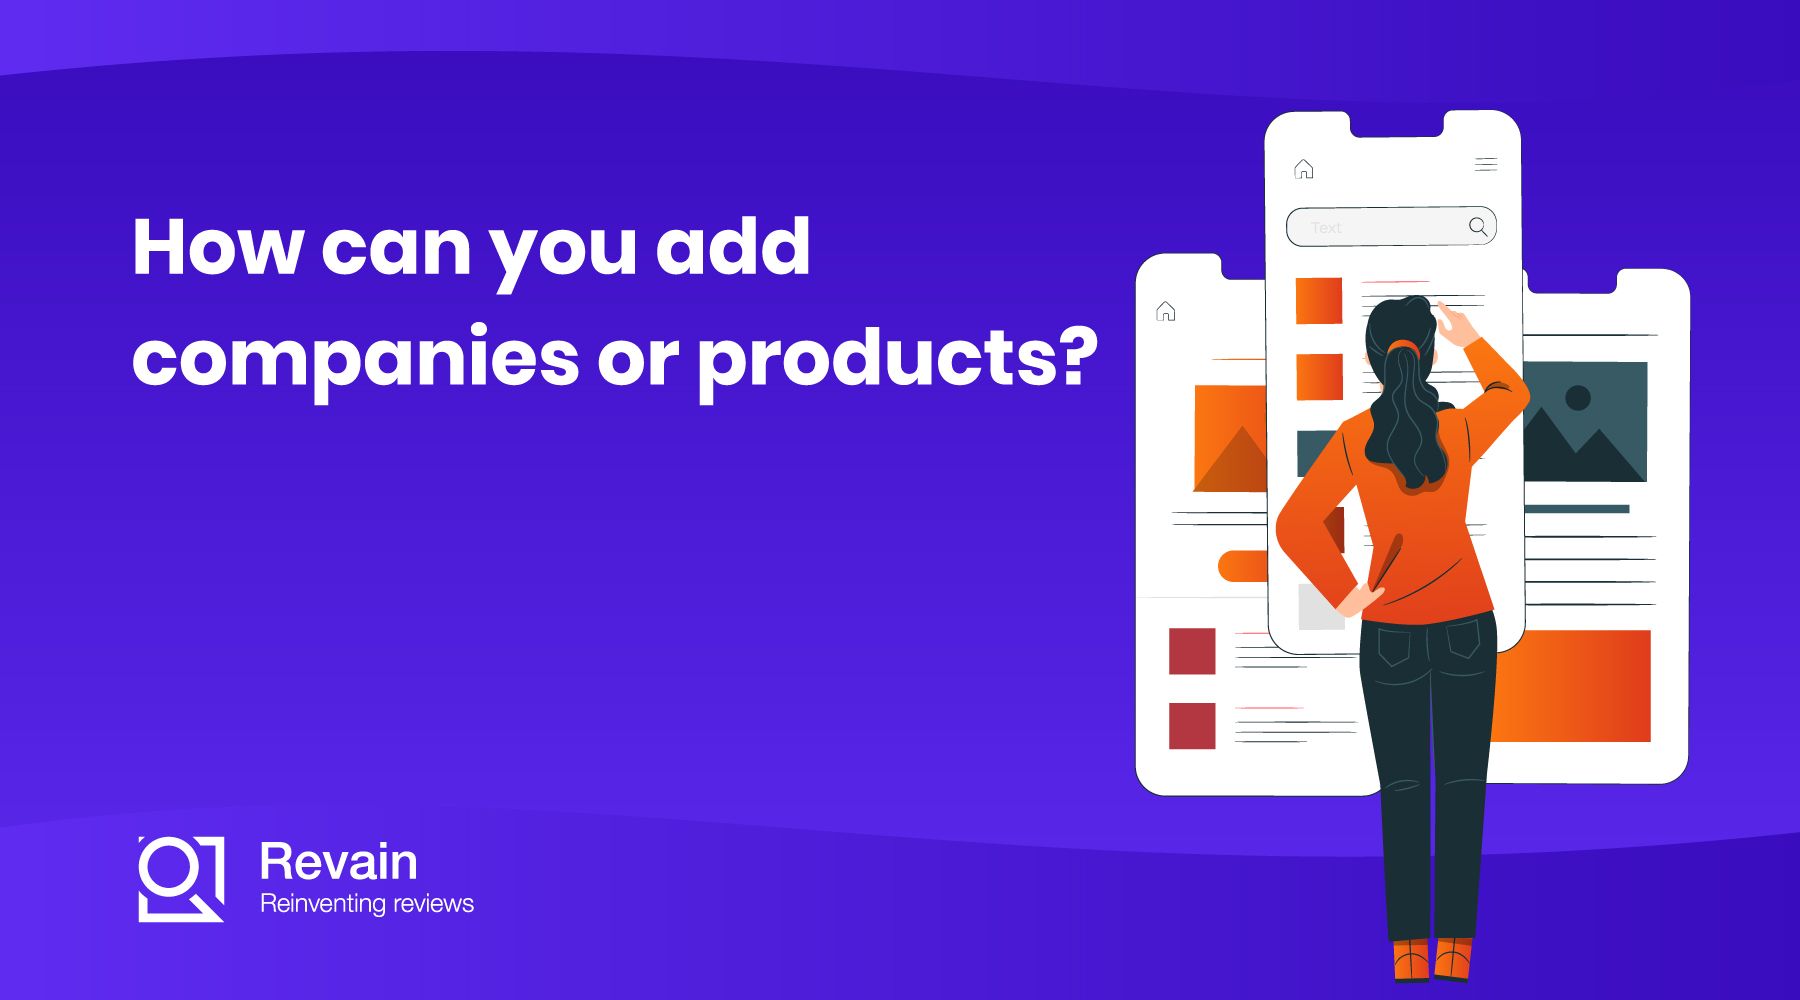 How can you add companies or products?